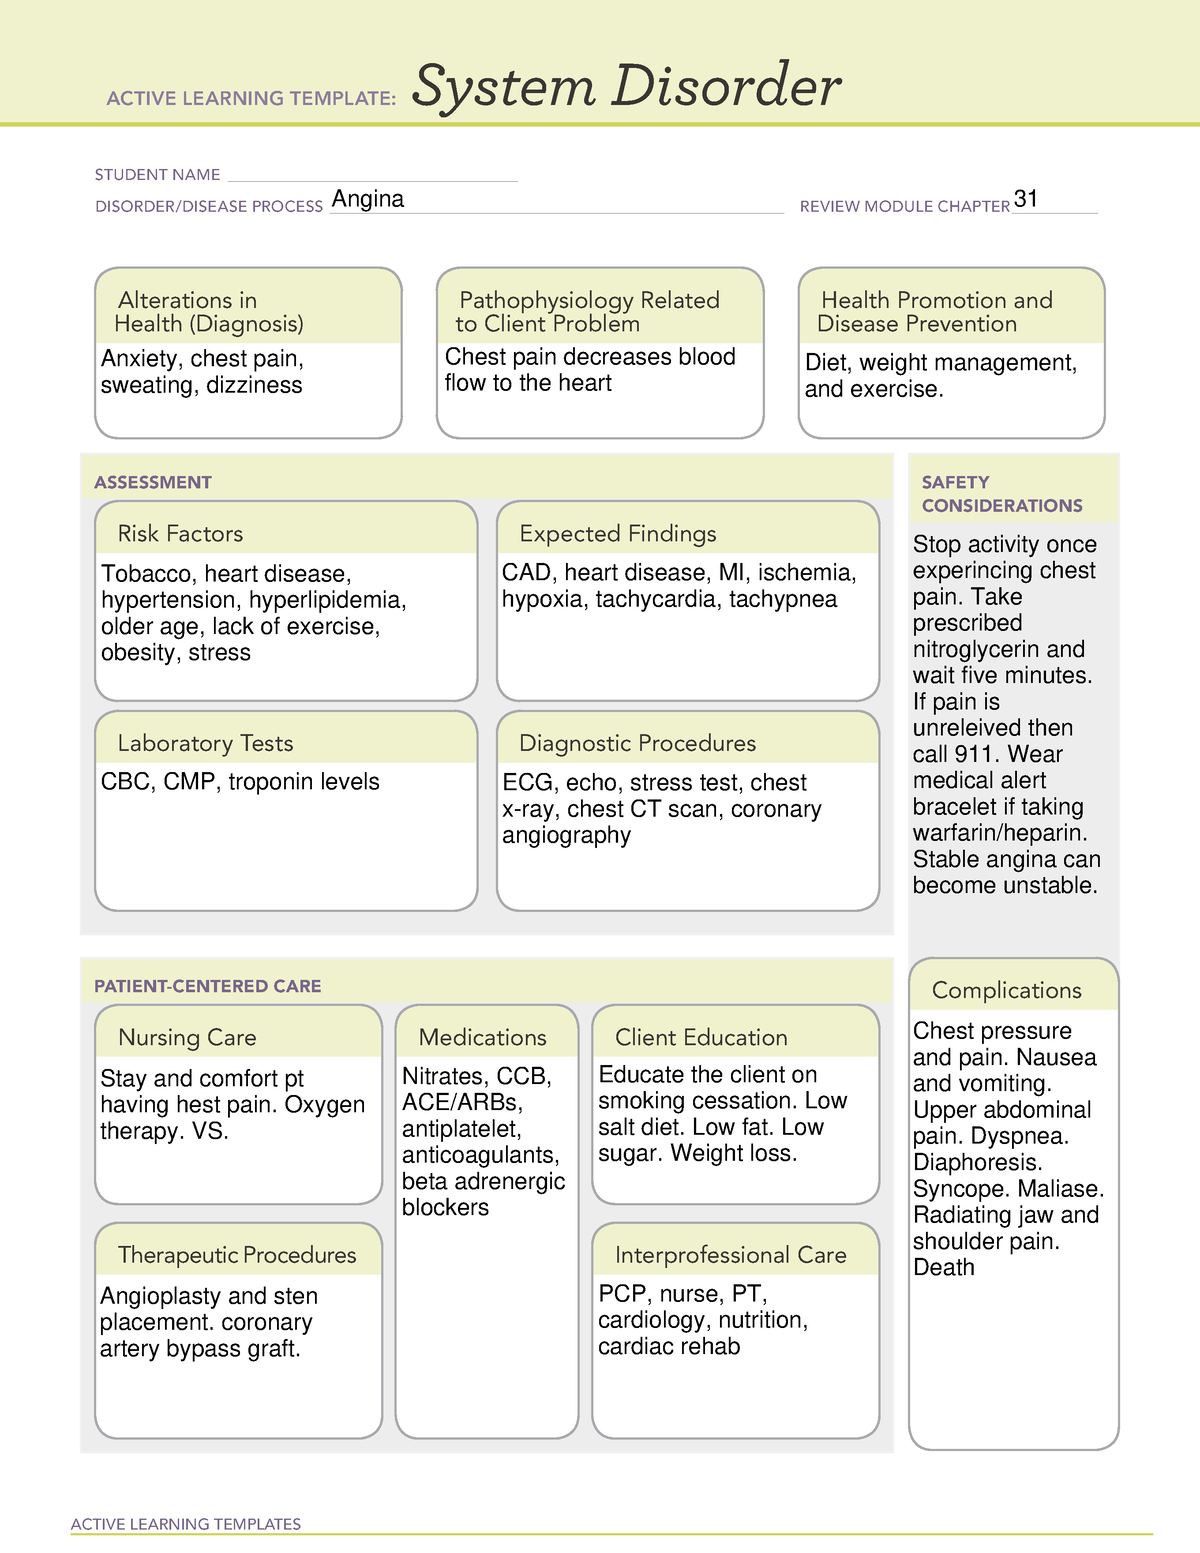 Angina Worksheet ACTIVE LEARNING TEMPLATES System Disorder STUDENT